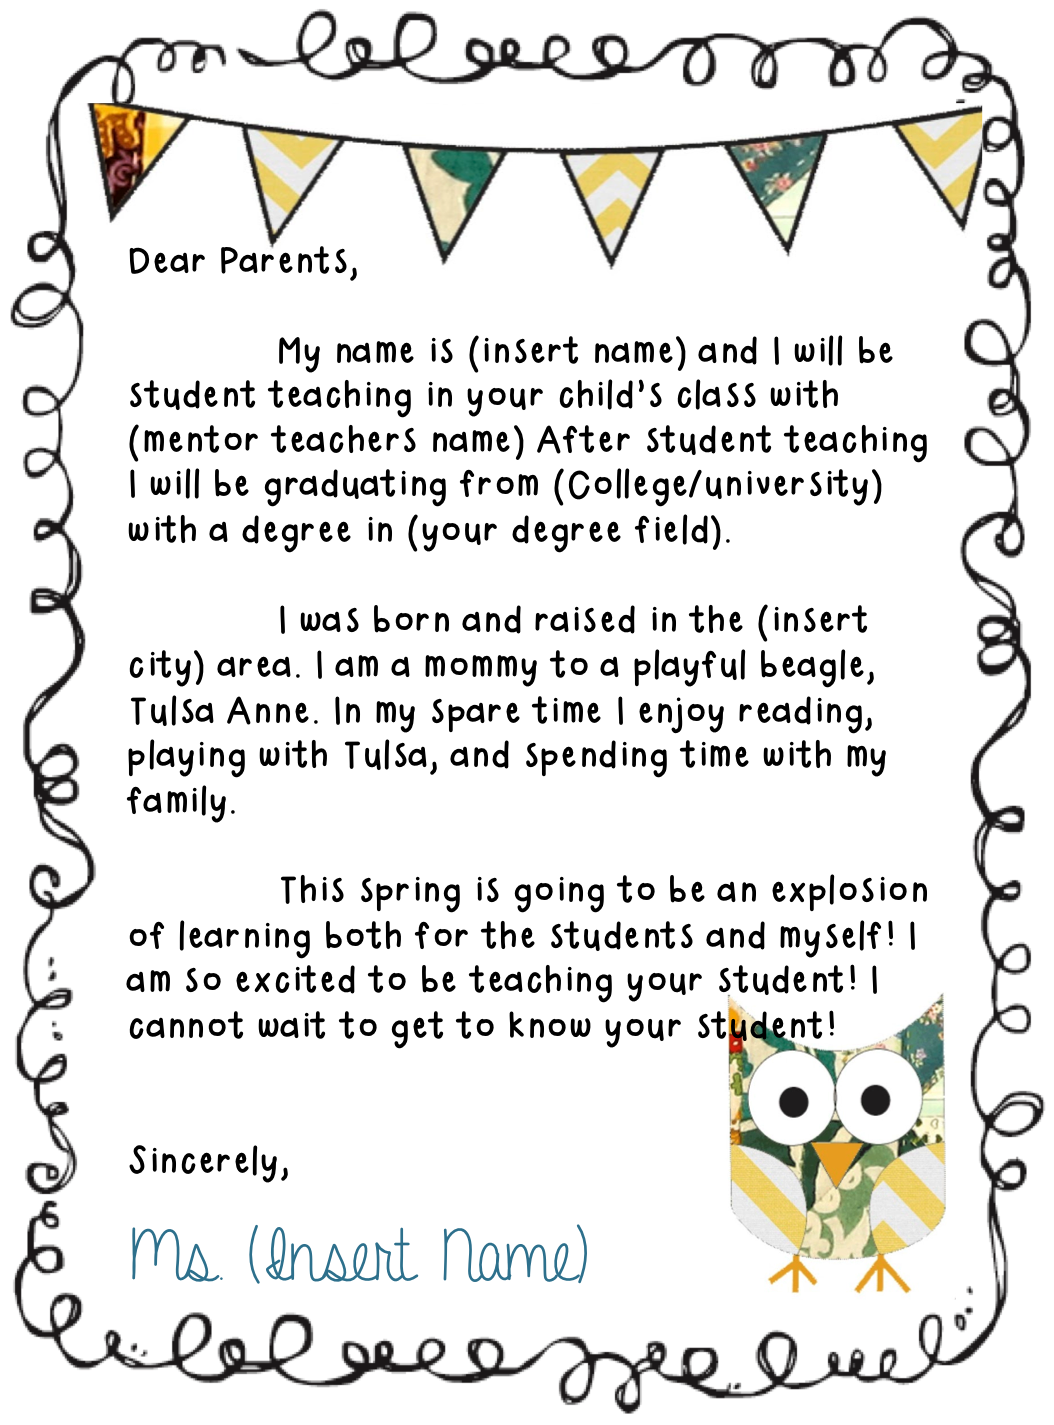 Letter to Parents! Student teaching, Letter to teacher, Letter to parents